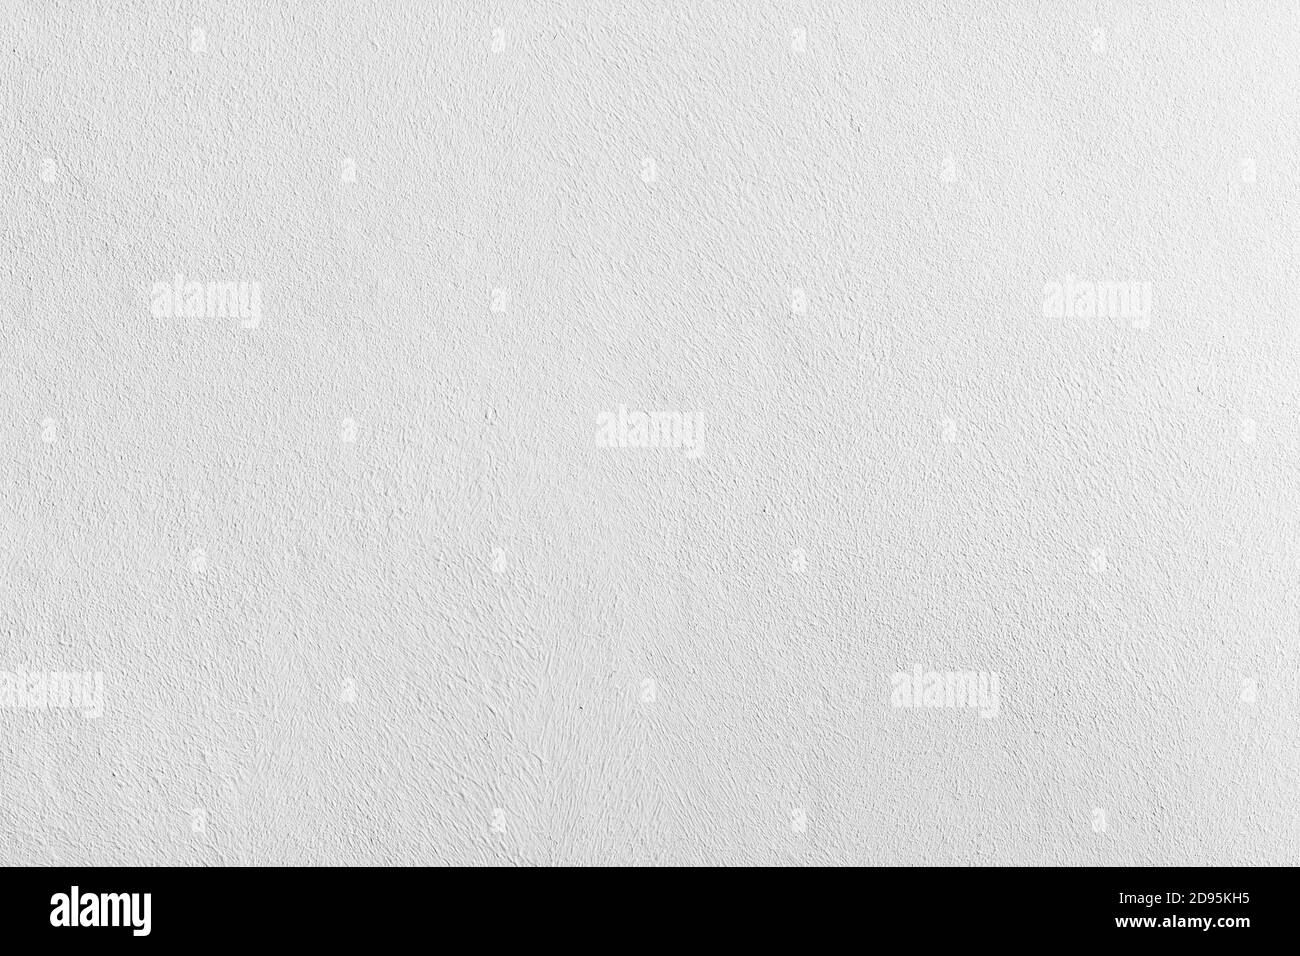 Subtle surface texture of a white painted bedroom wall Stock Photo